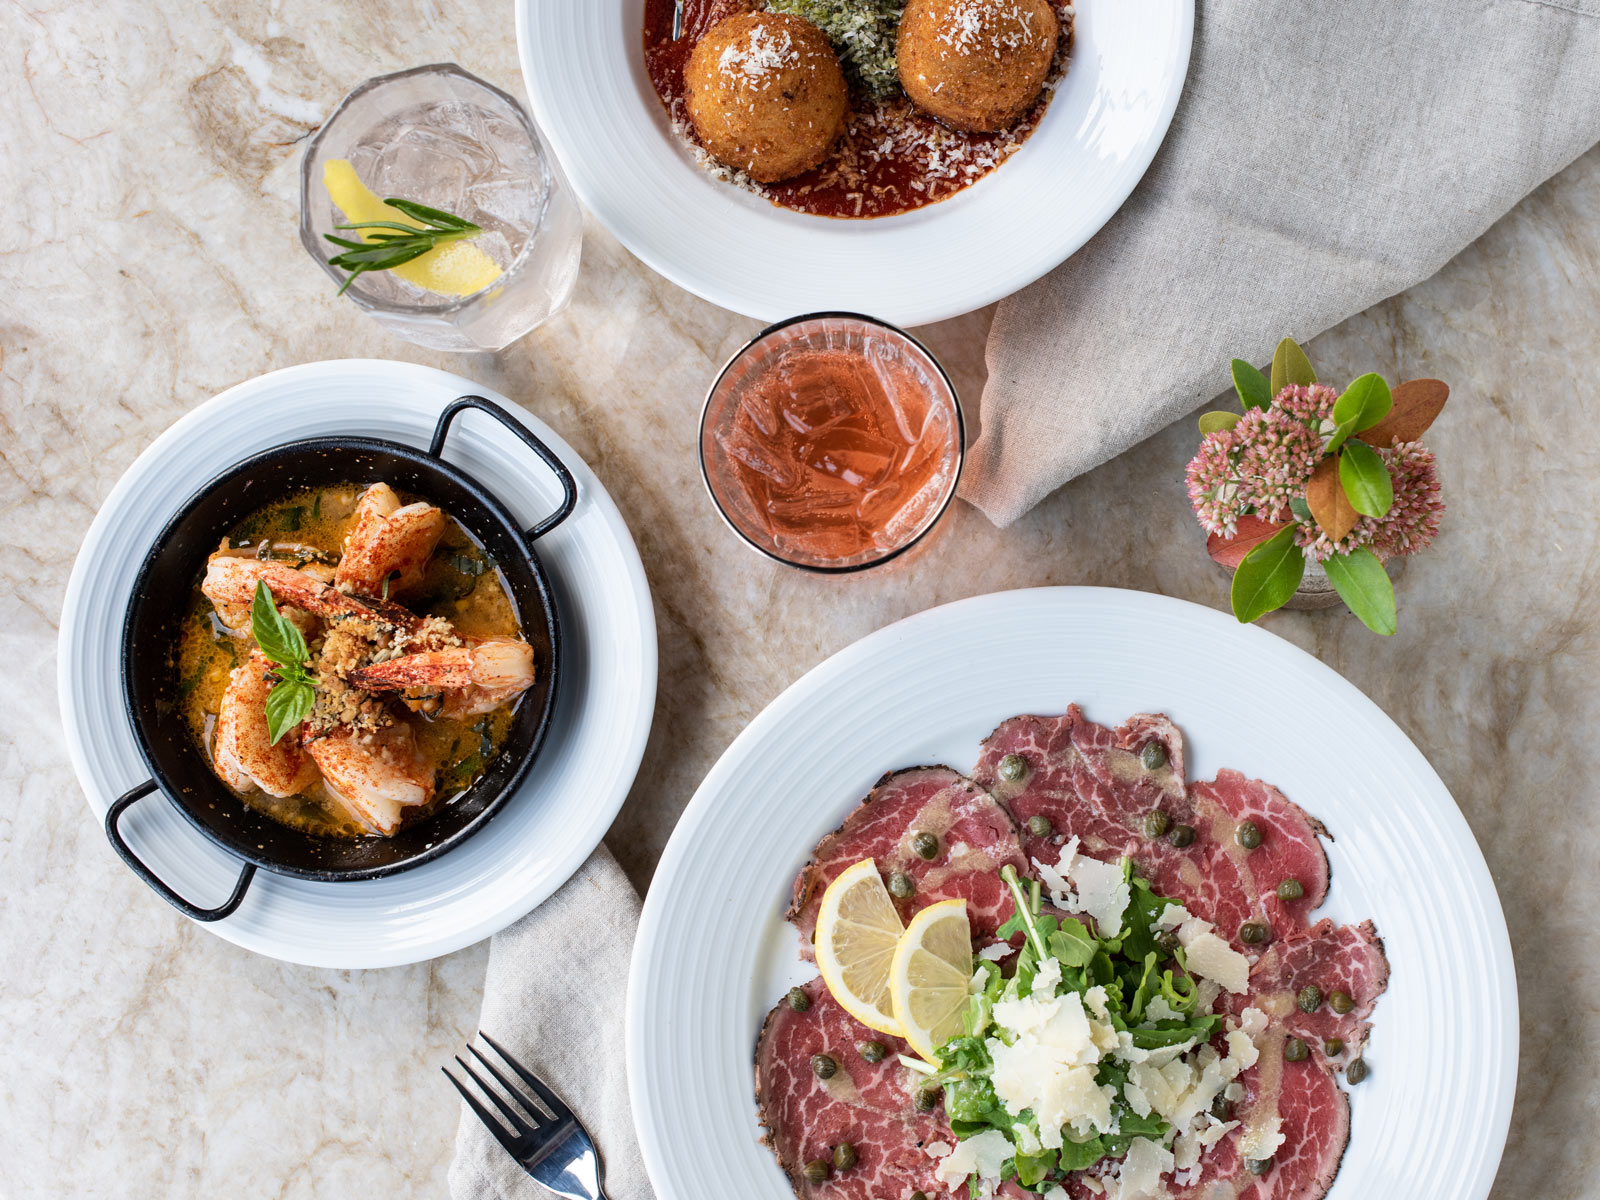 Top-down view of a marble table with shrimp scampi al forno, beef carpaccio and arancini